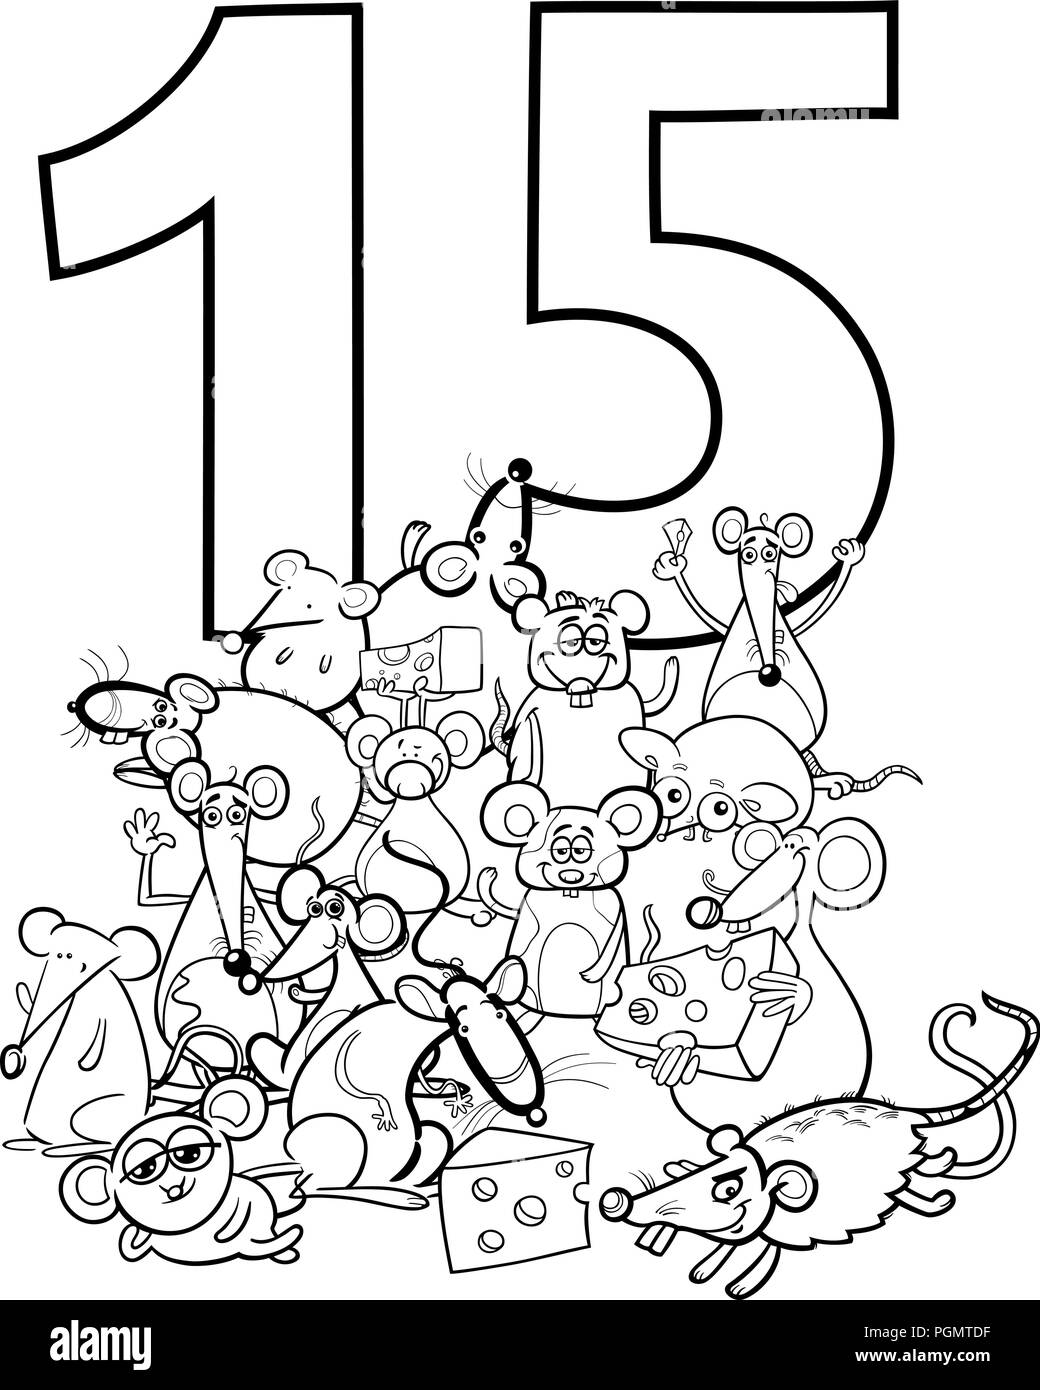 Black and White Cartoon Illustration of Number Fifteen and Mice Characters Group Coloring Book Stock Vector